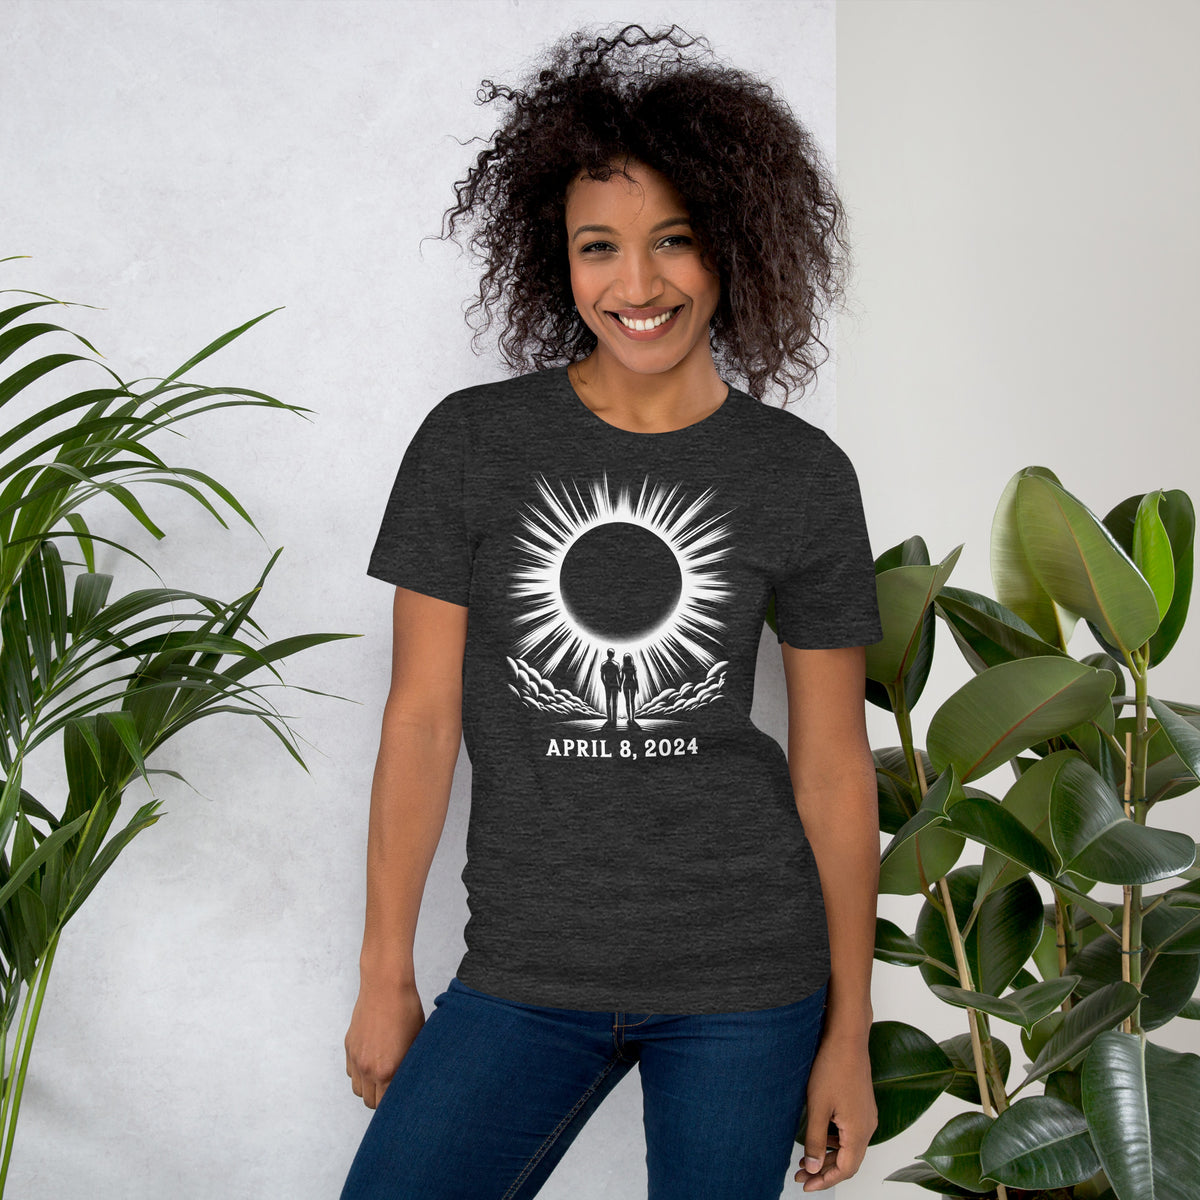 Total Solar Eclipse 2024 Shirt, April 8Anniversary Gift, Couples Tee for Husband and Wife, Boyfriend Girlfriend Astronomy Gift